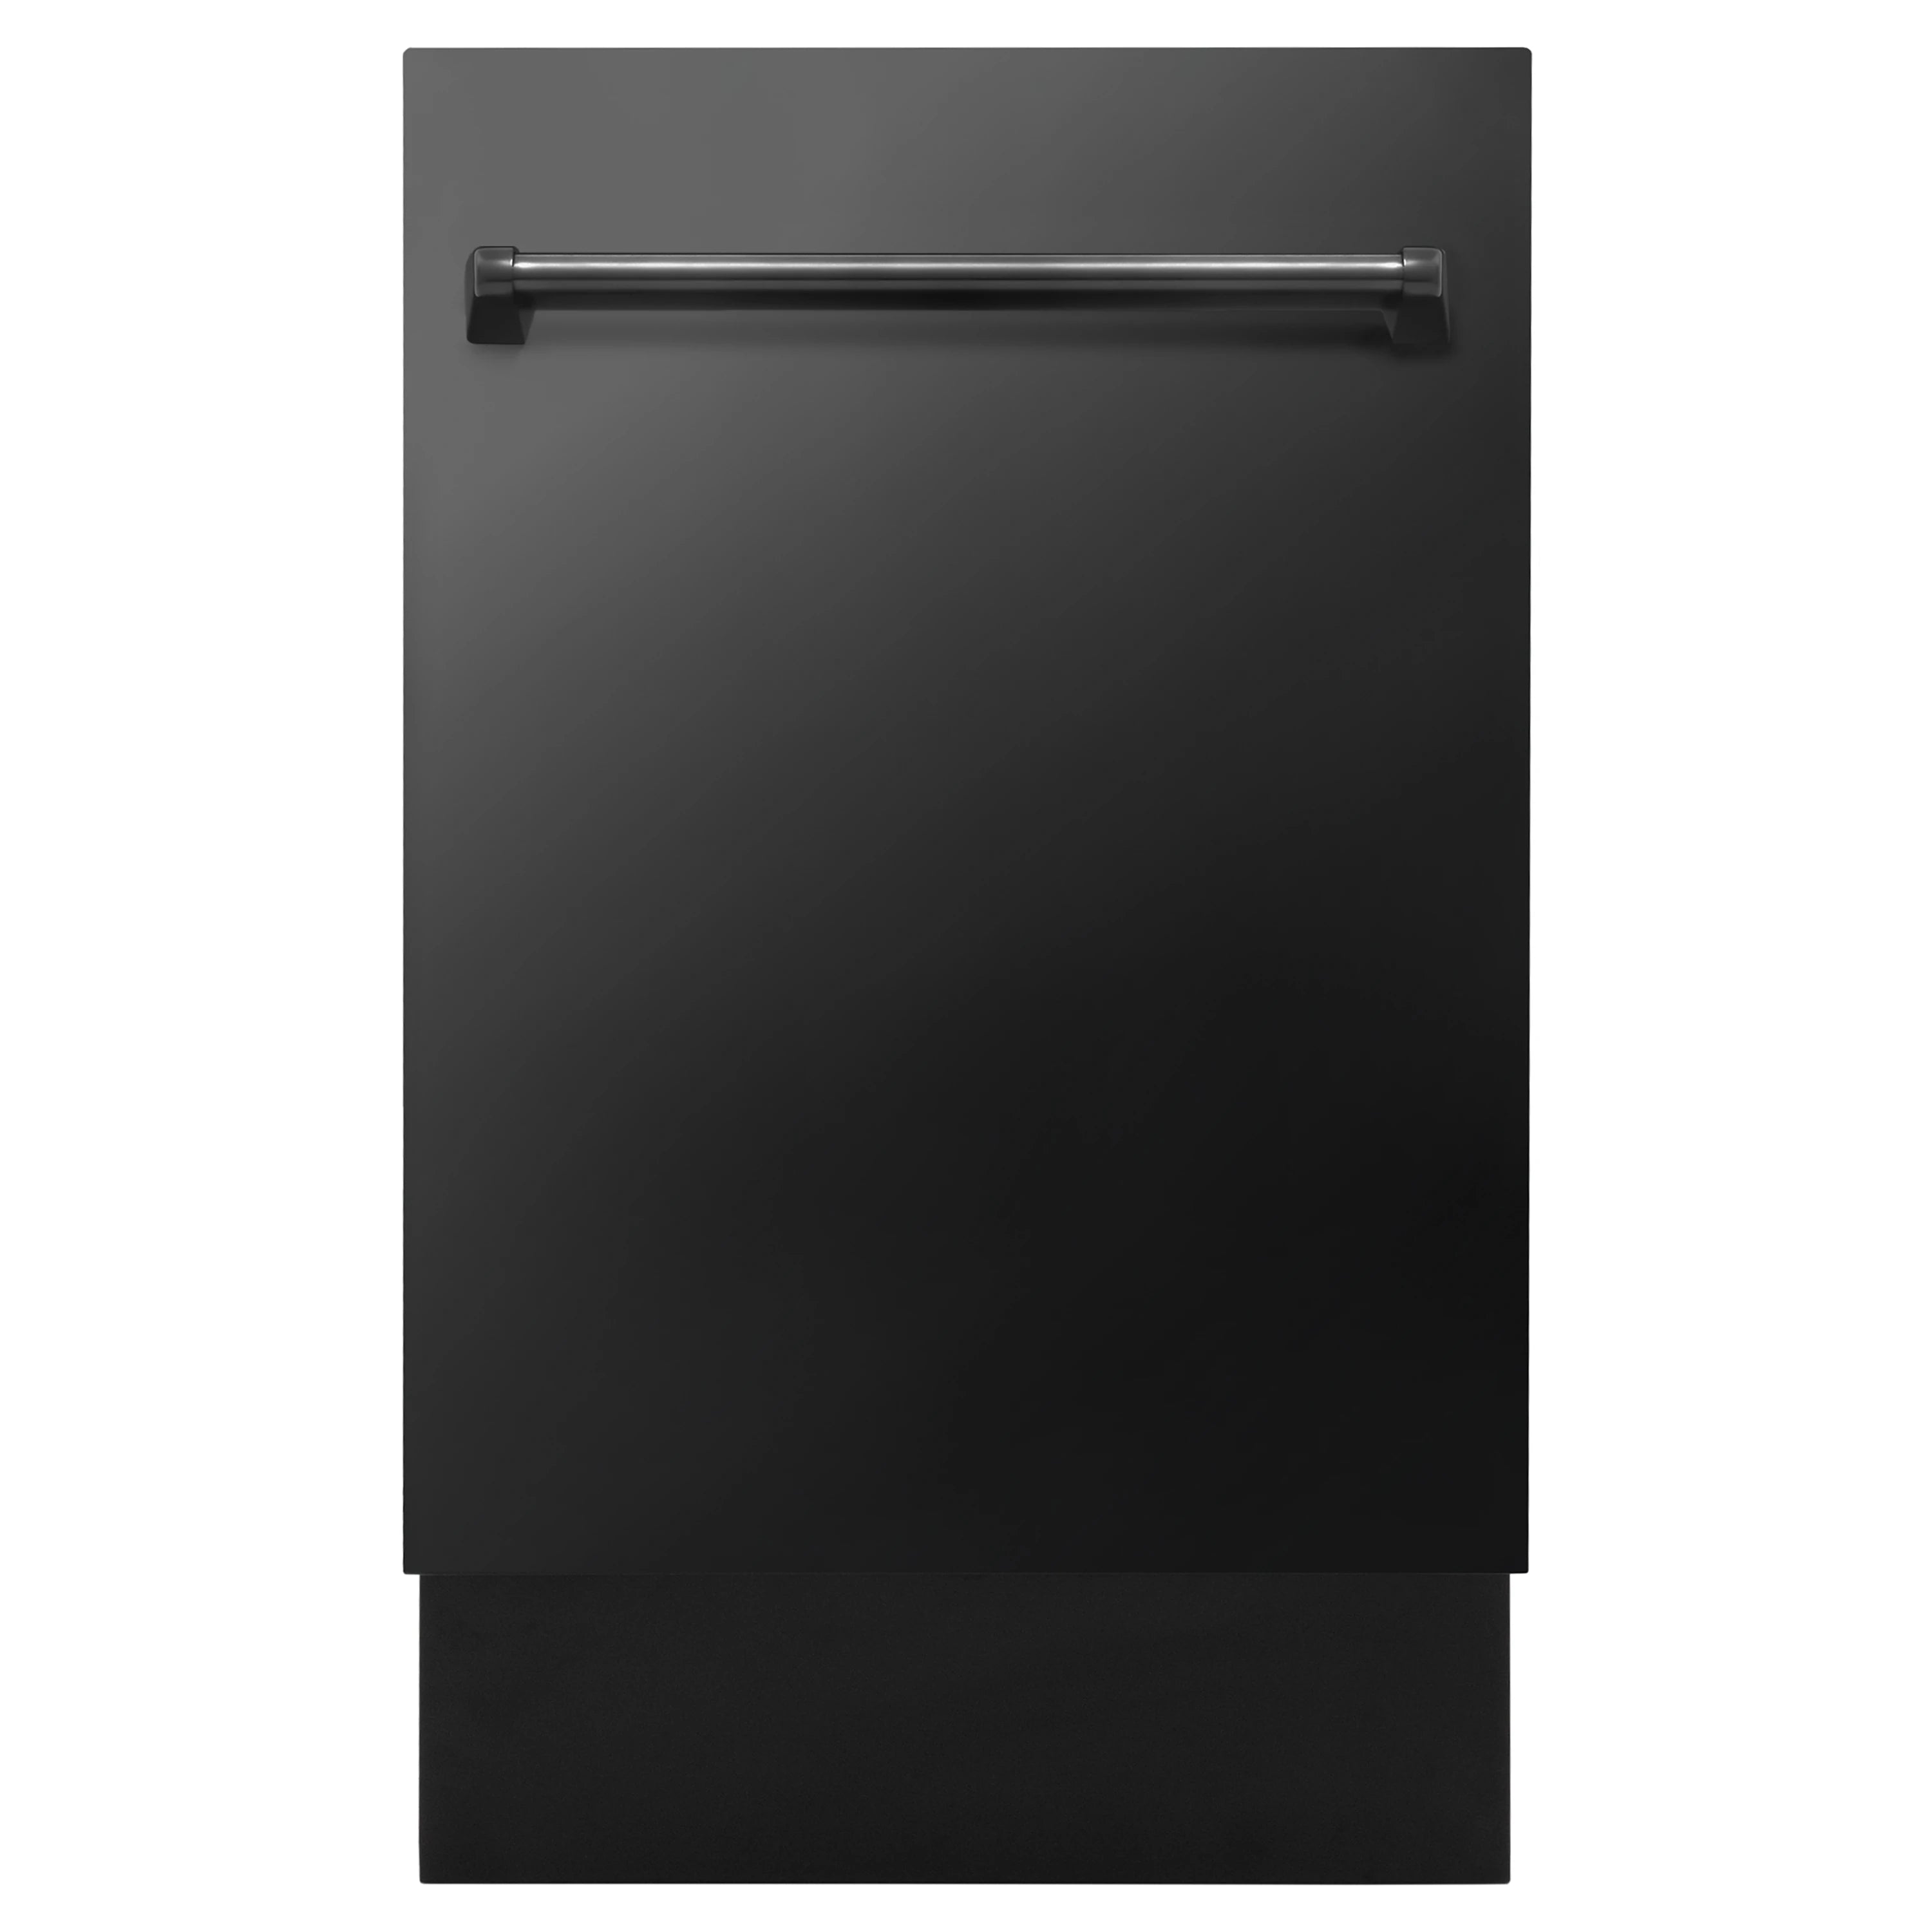 ZLINE 18 Top Control Dishwasher in Custom Panel Ready with Stainless Steel Tub